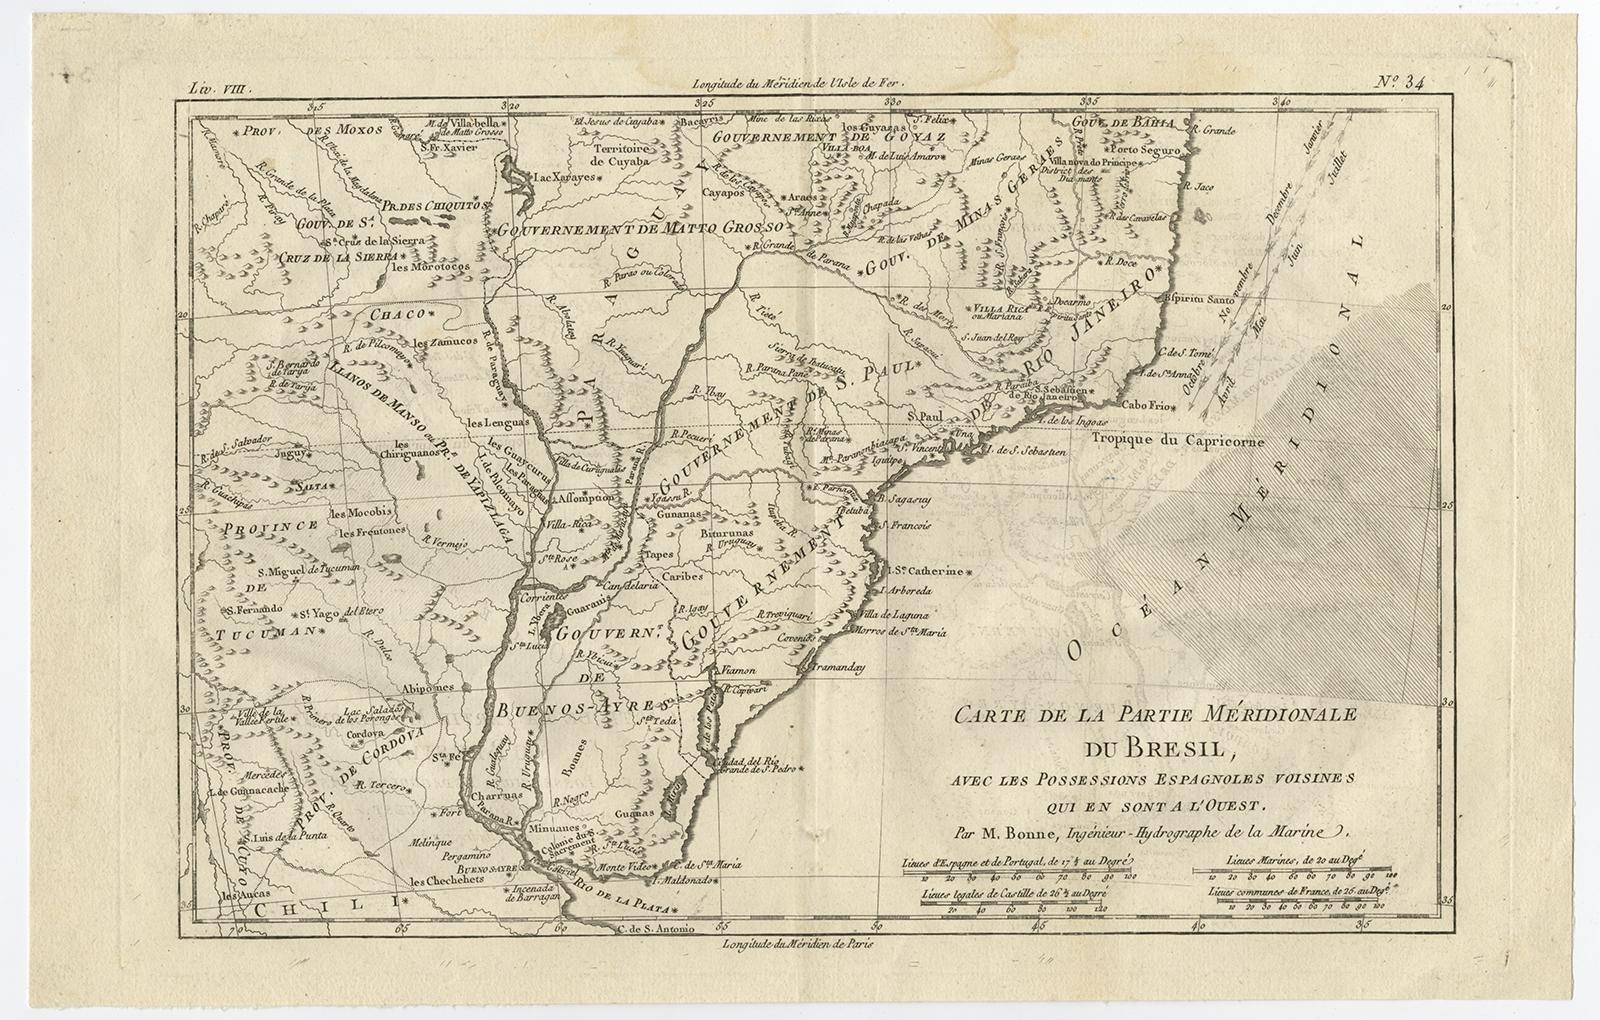 Antique map titled 'Carte de la Partie Méridionale du Bresil (..)'. This antique map of Brazil depicts southern Brazil, Uruguay, and northern Argentina, including Rio de Janeiro, Montevideo, and Buenos Aires. Published by R. Bonne. 

Artists and